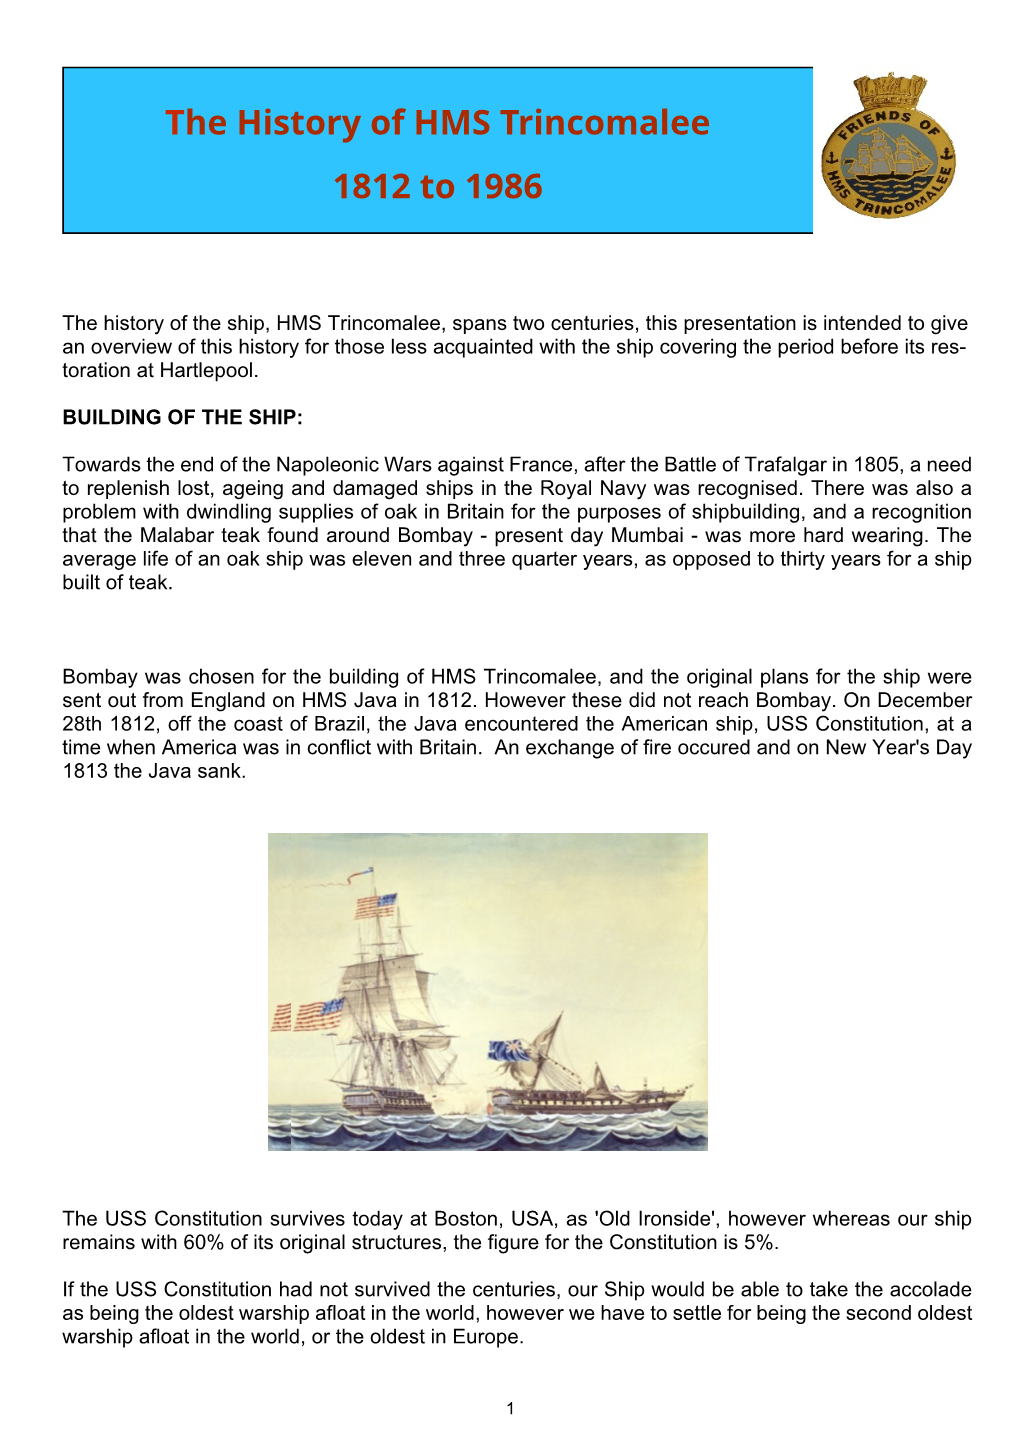 TK001 the History of HMS Trincomalee 1812 to 1986